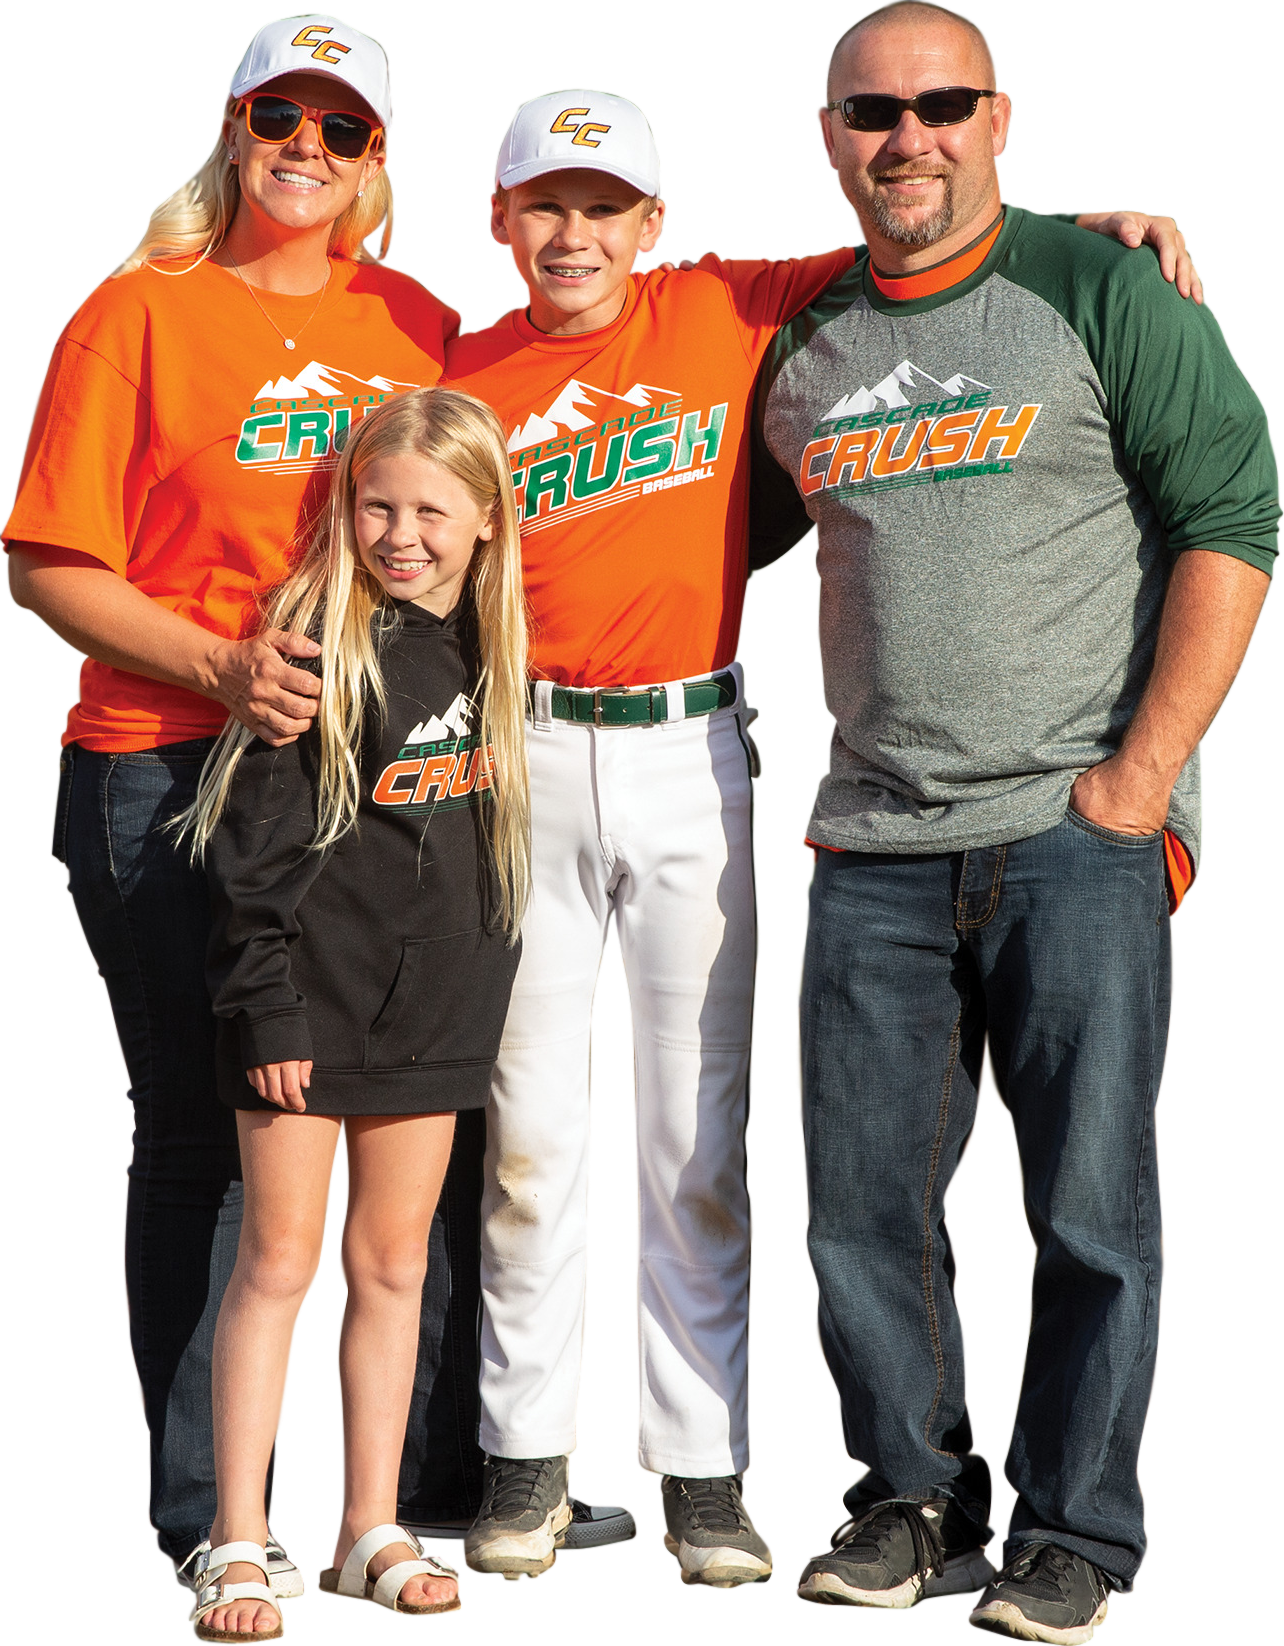 A family showing there custom printed apparel.